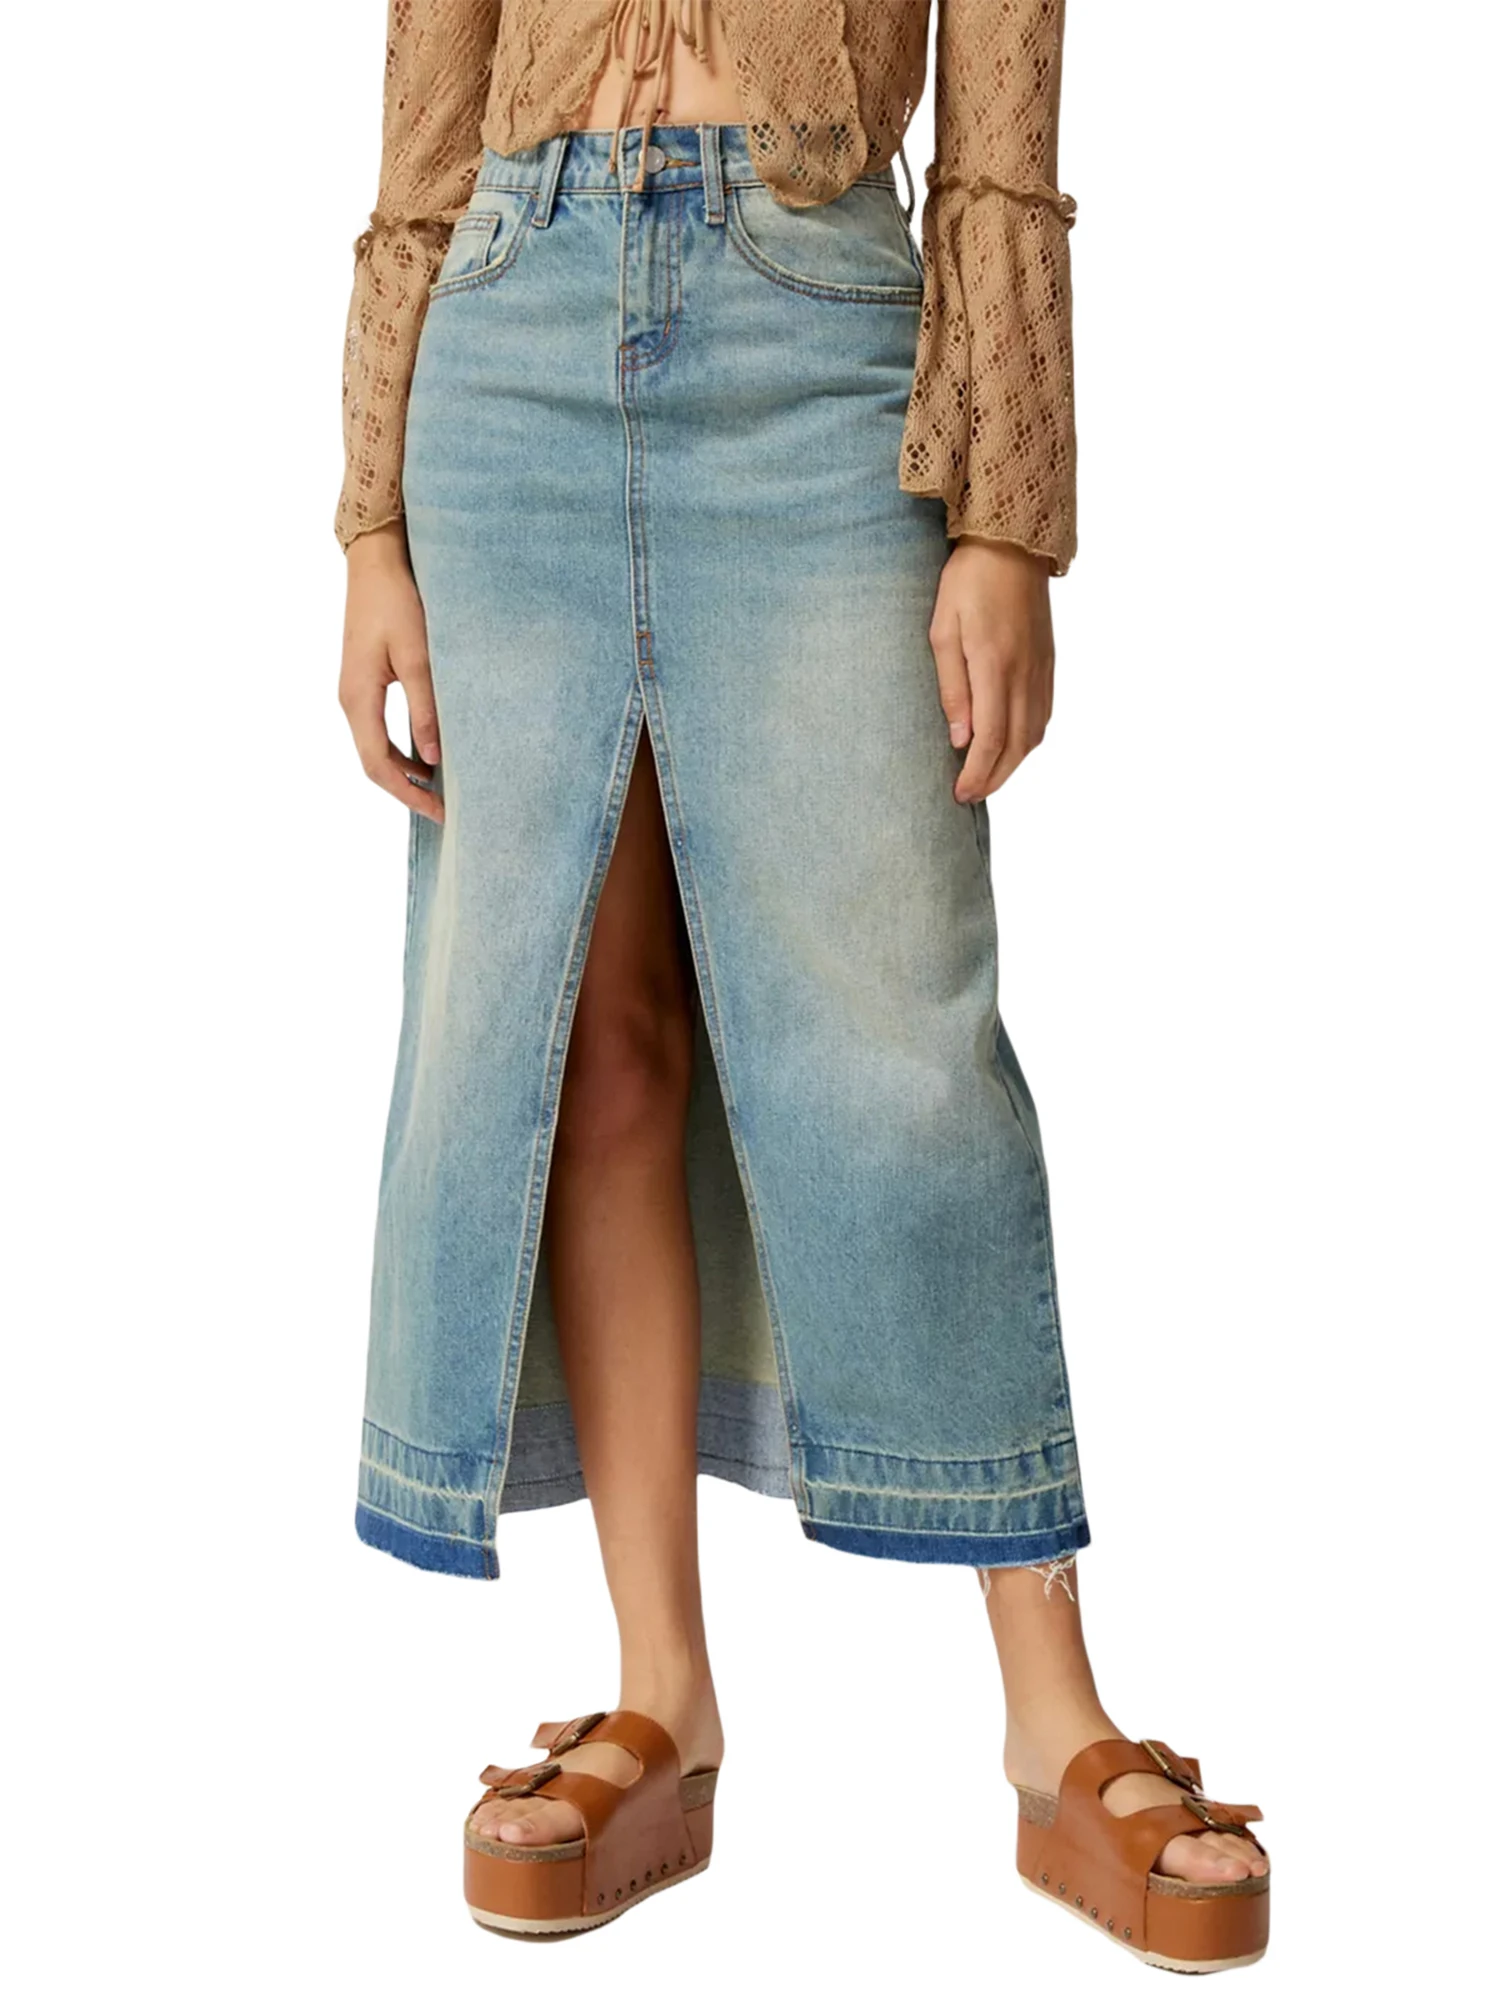 

Women s Vintage Washed Denim Skirt with Distressed Details and Fringed Hemline - Stylish High Waist A-Line Skirt for Casual and